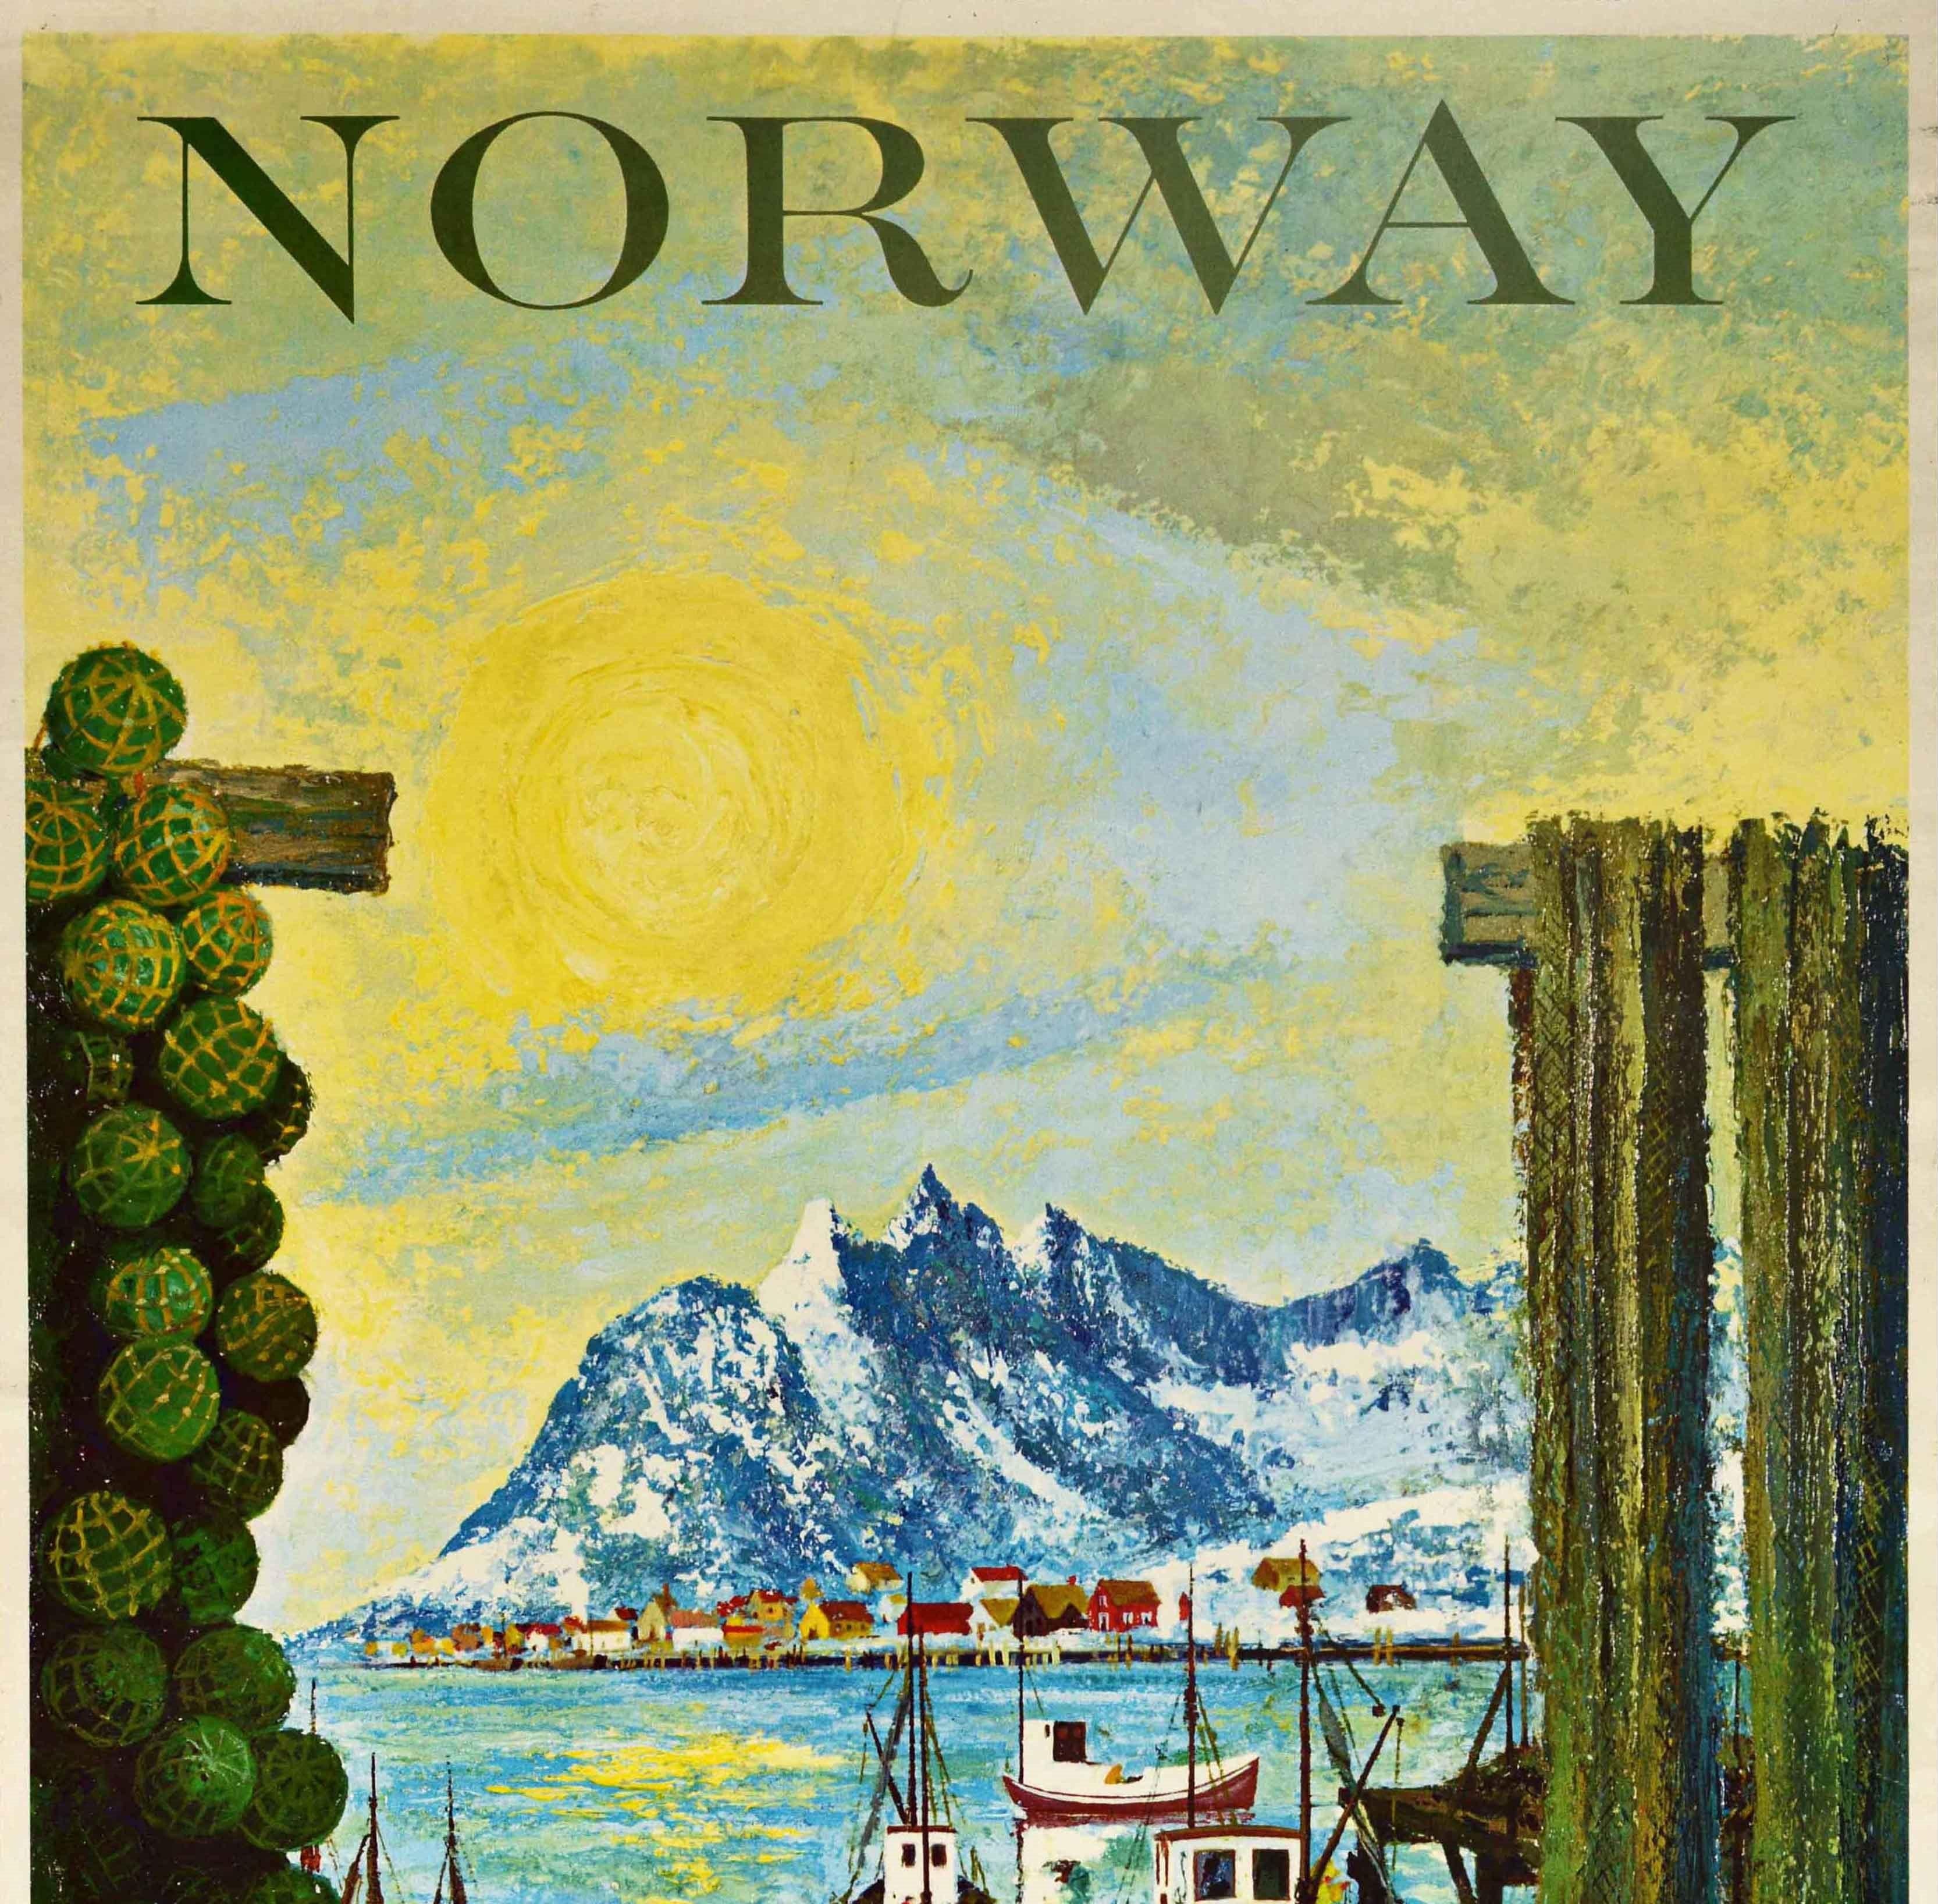 Original vintage travel poster promoting Norway as a tourist destination featuring a great illustration of boats on a shore and fishing ships on the water by a pier, a little fishing village in the snow in the distance, sharp mountain peaks of the